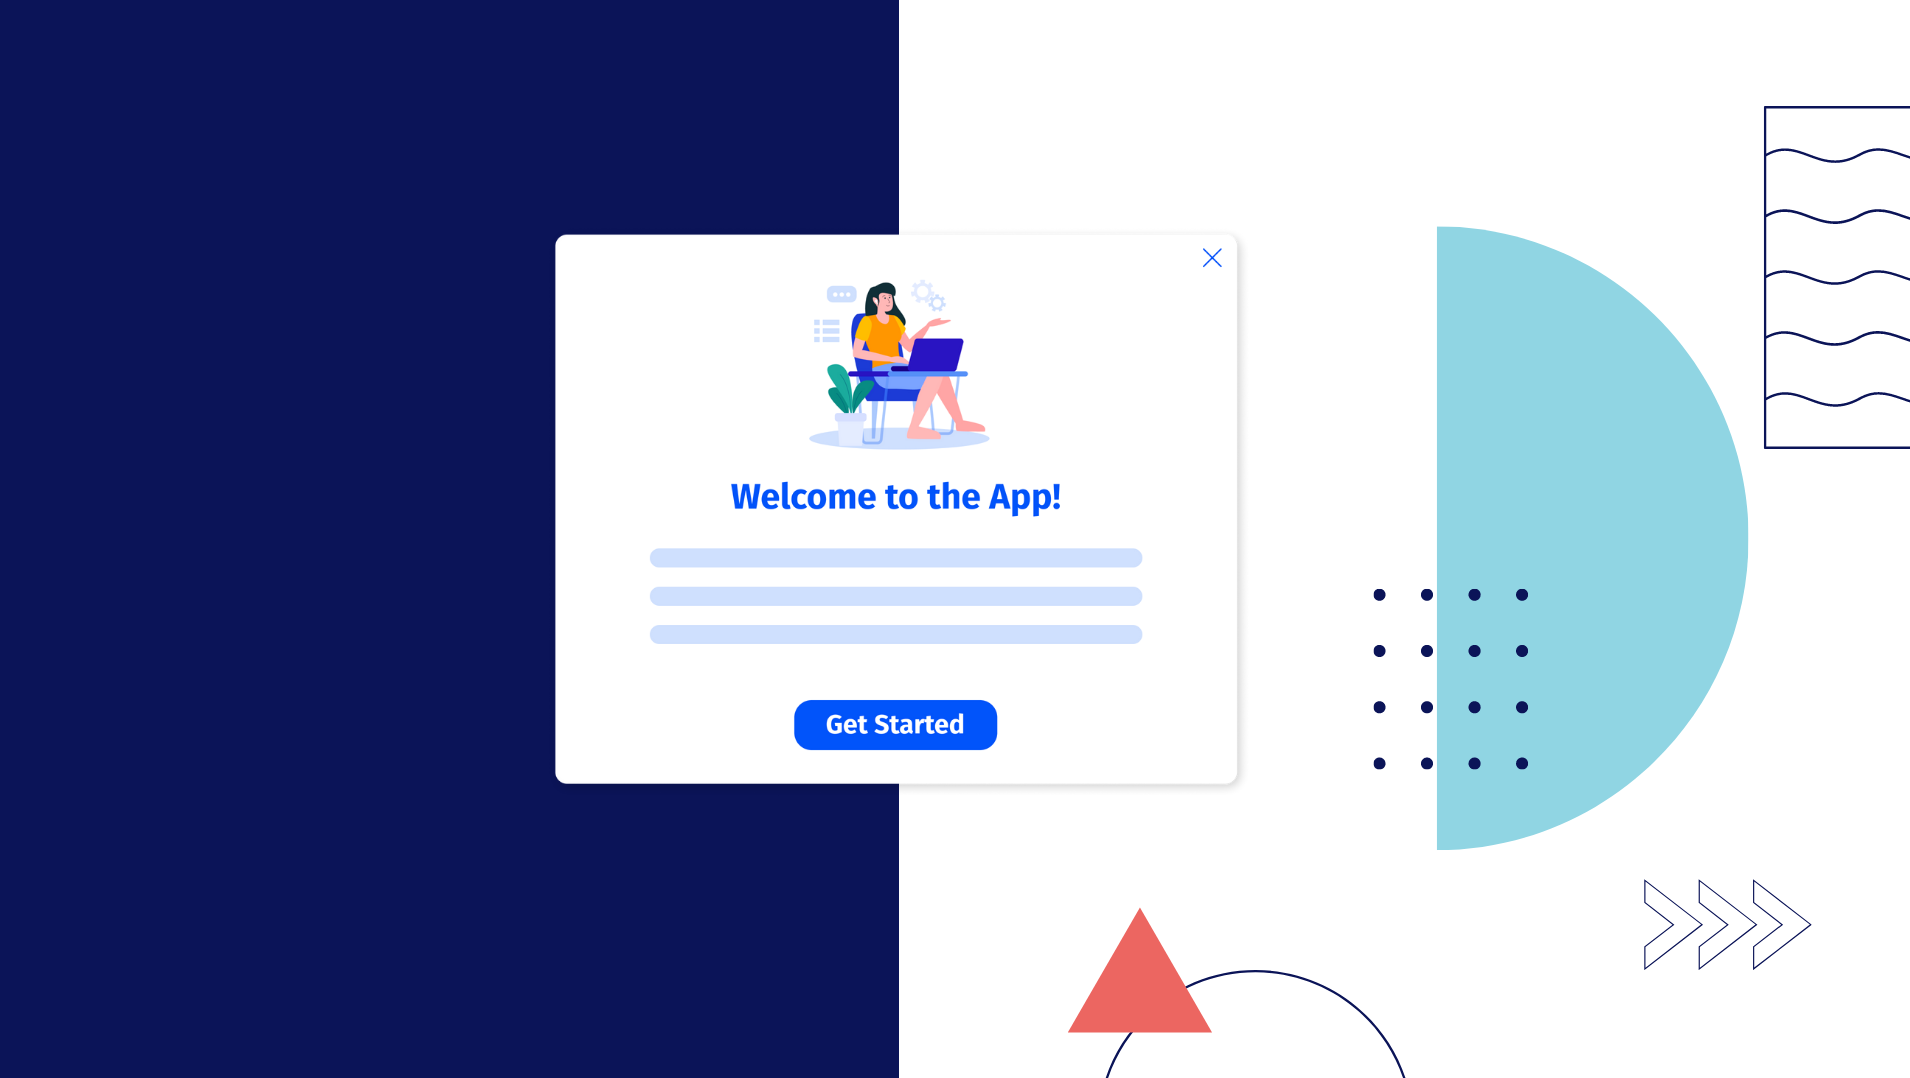 How to Design Great Product Onboarding Experiences using Product Tours